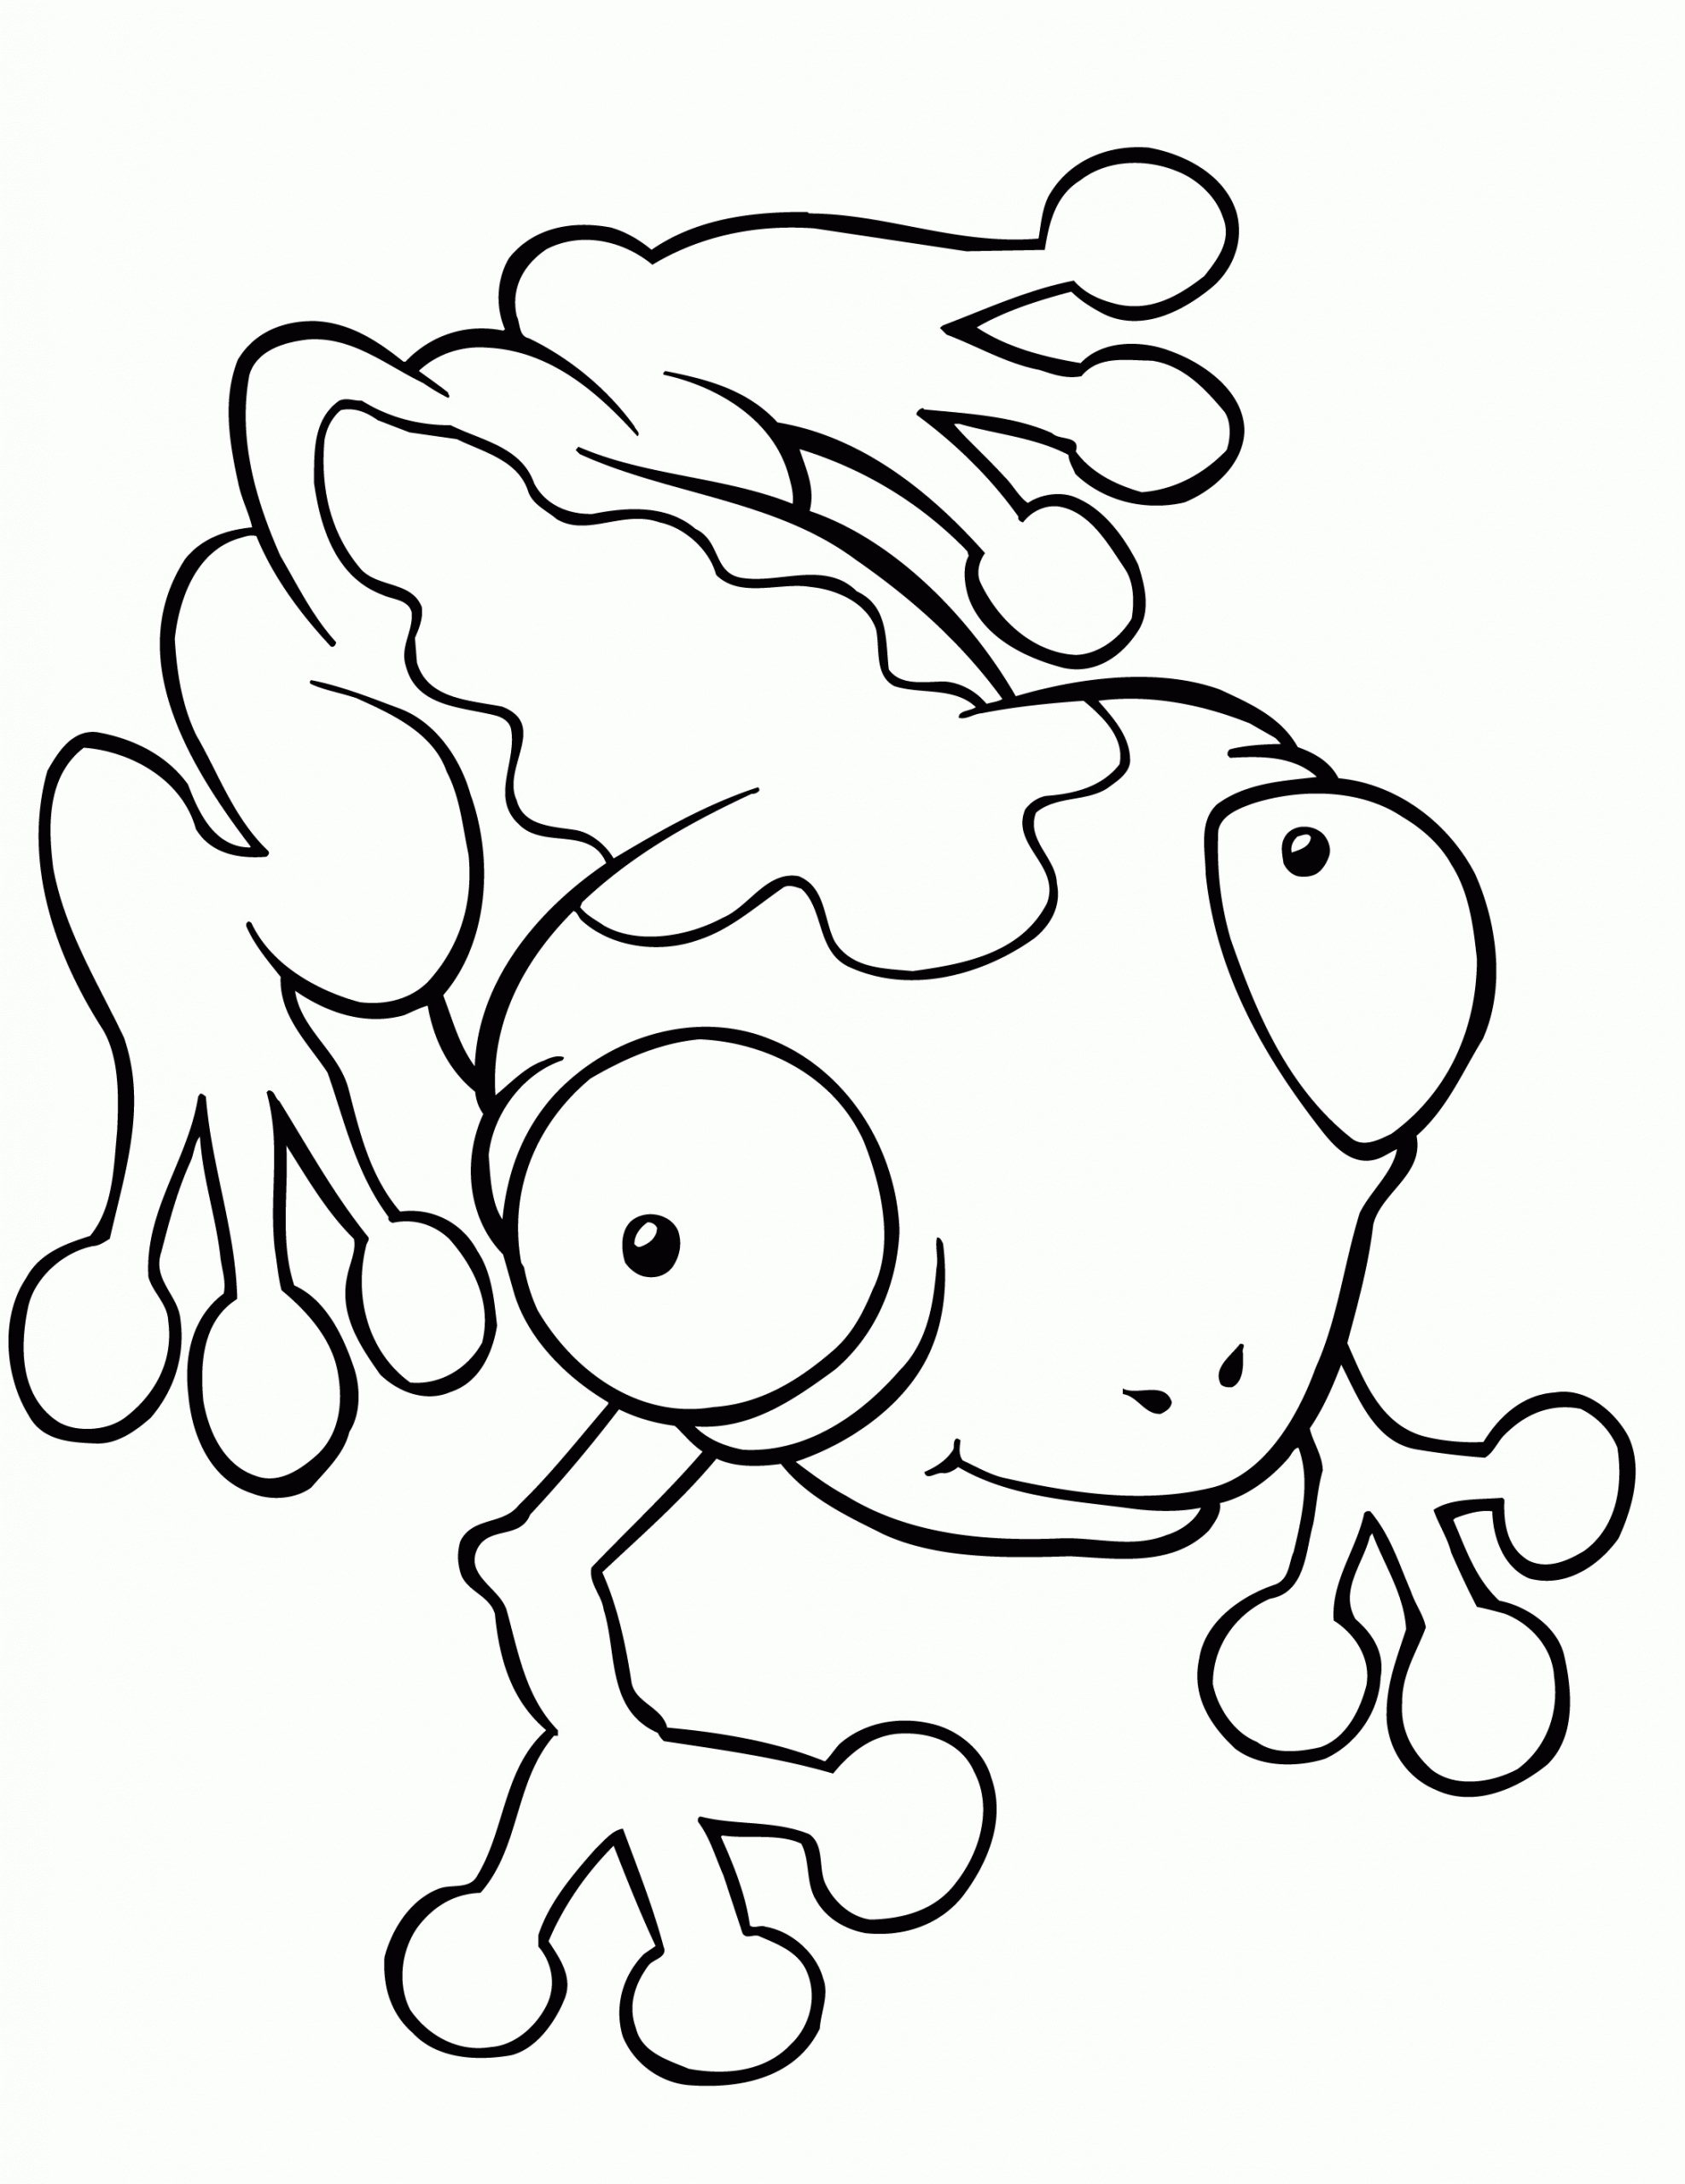 Ugly Toad Coloring Page